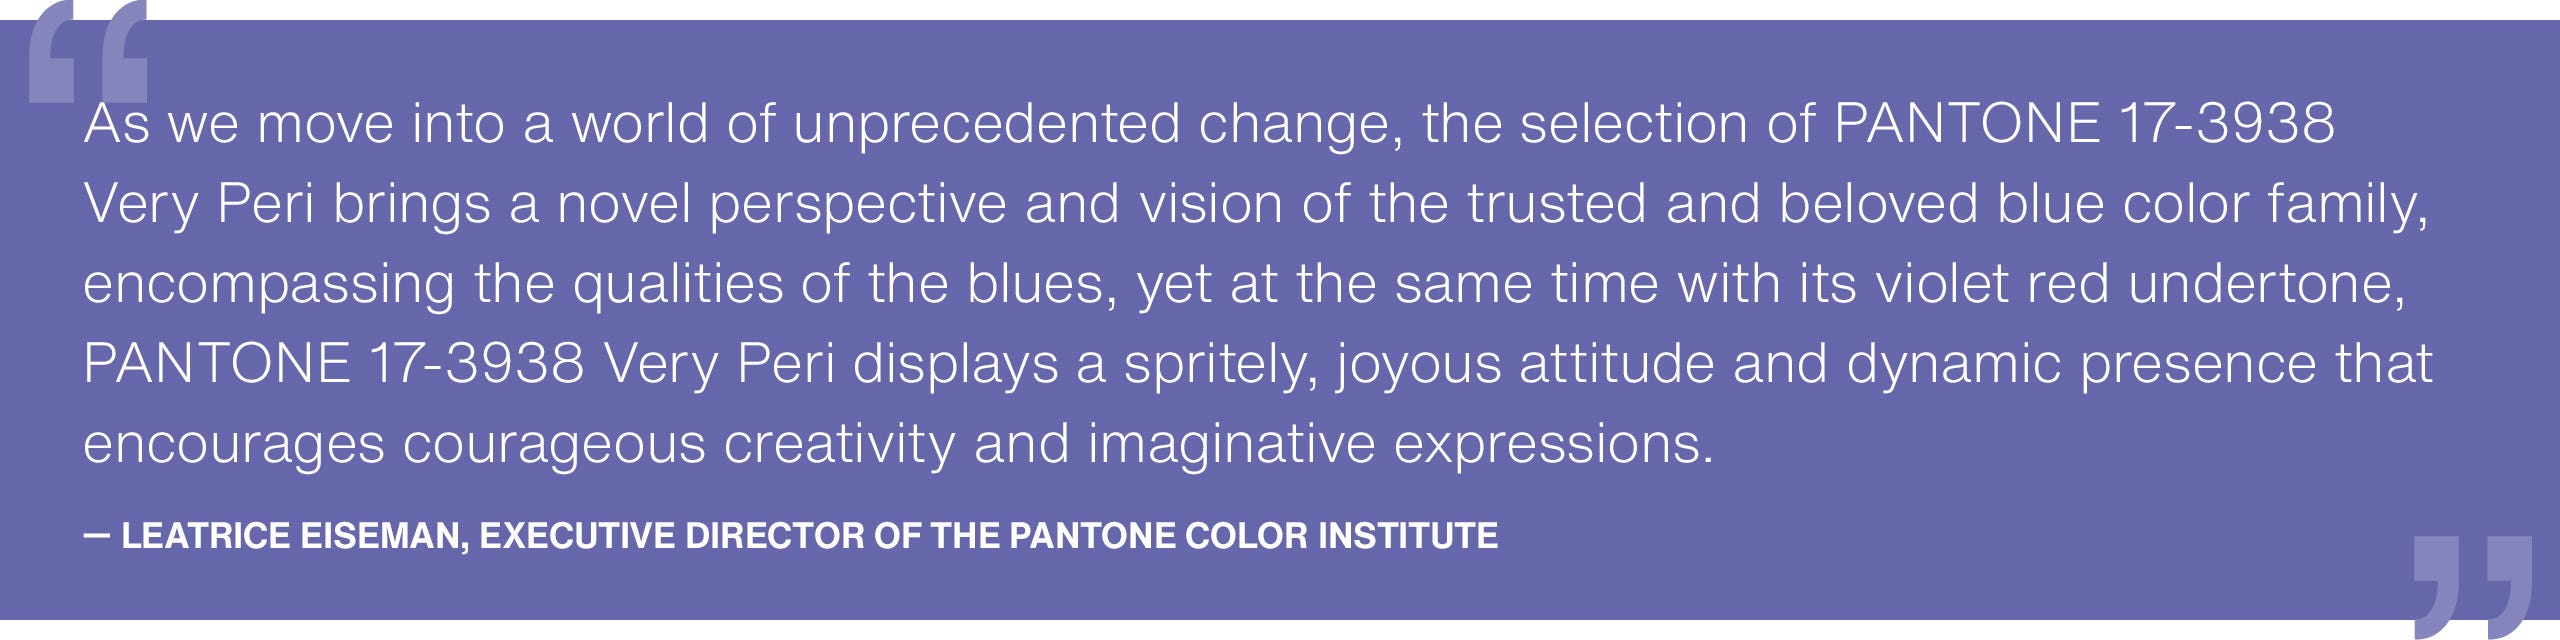 Quote from Pantone's Executive Director describing the nature of Very Peri